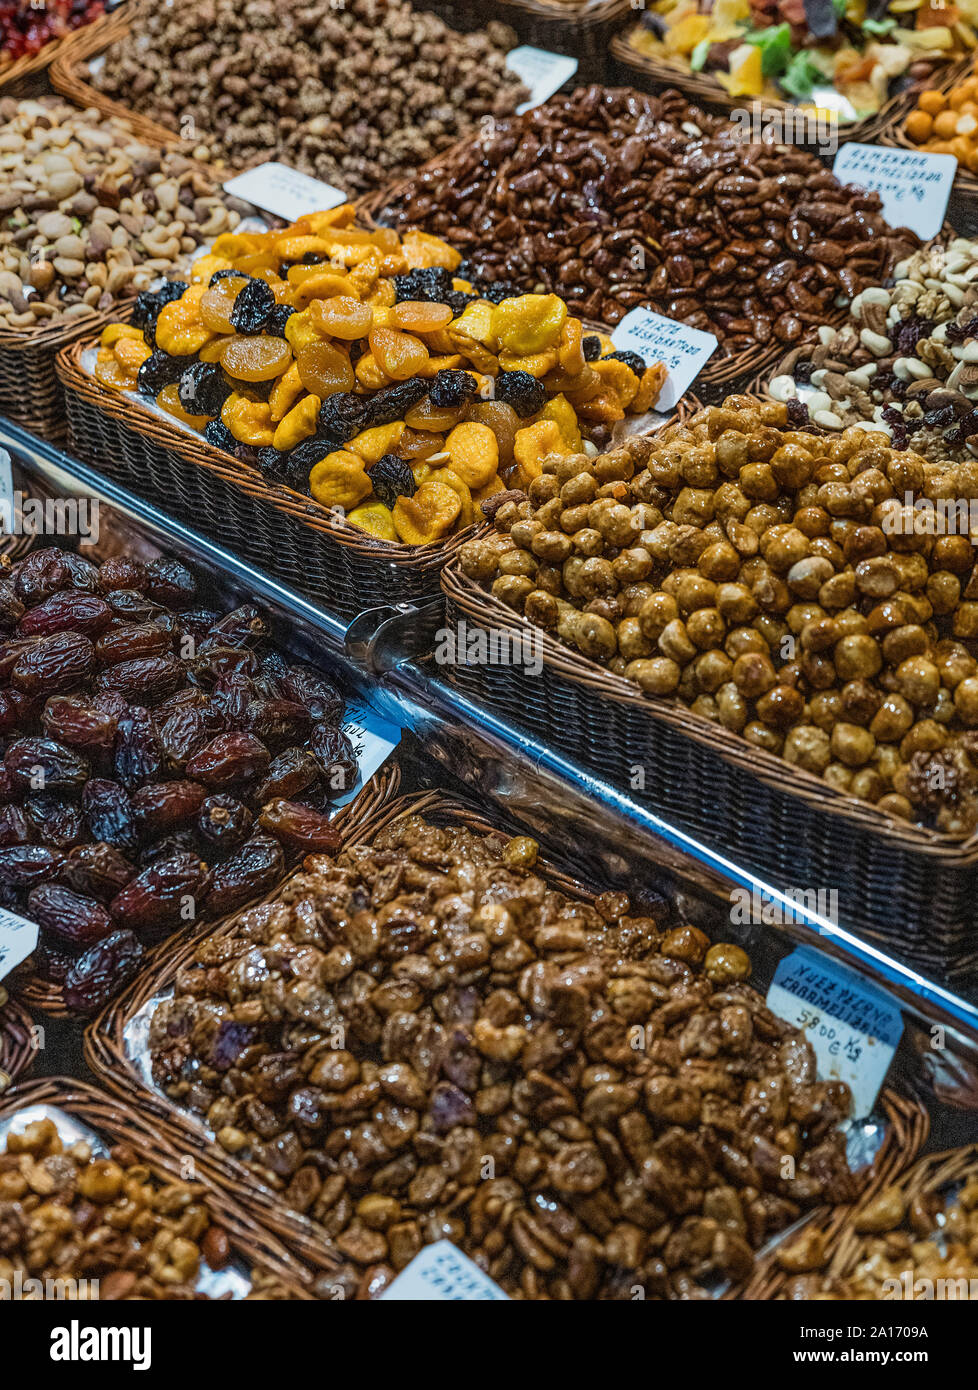 Dried fruit and nuts,  Boqueria Market, Barcelona, Spain. Stock Photo